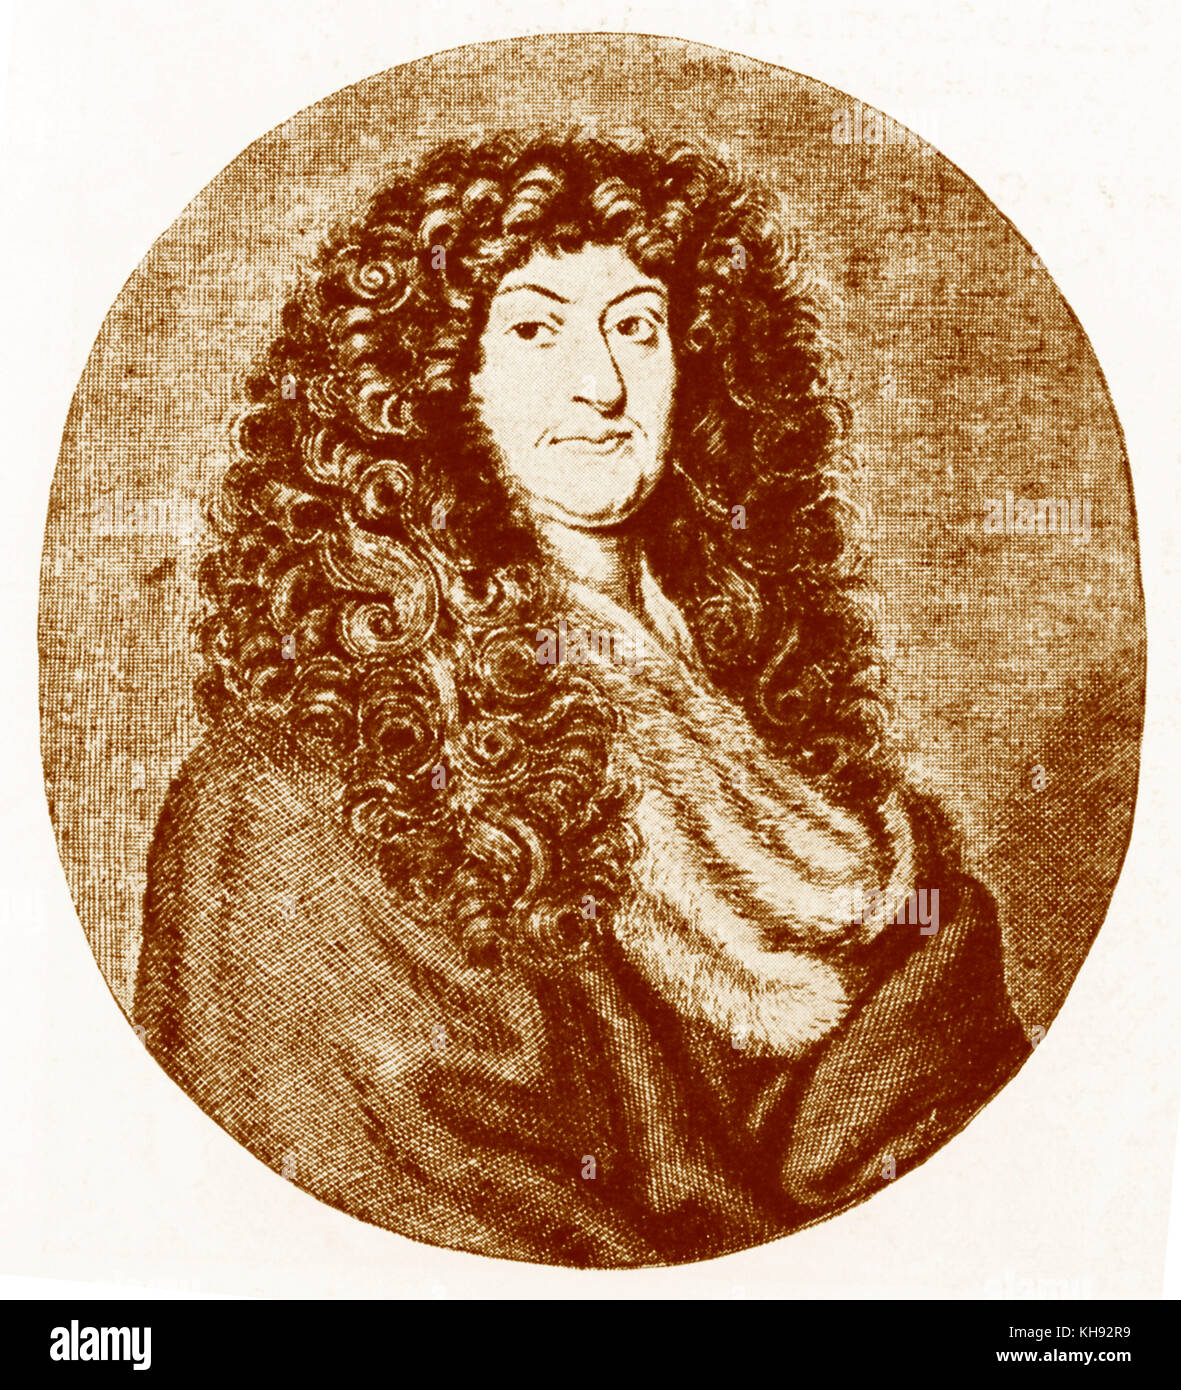 Johann Christoph Wagenseil, author of the book De civitate Noribergensi commentatio (1697). Engraving by Jacob Sandrart, 1690. JCW: German, November 26 1633 - October 9 1705. Used as source by Wagner for information on guild of mastersingers. Stock Photo